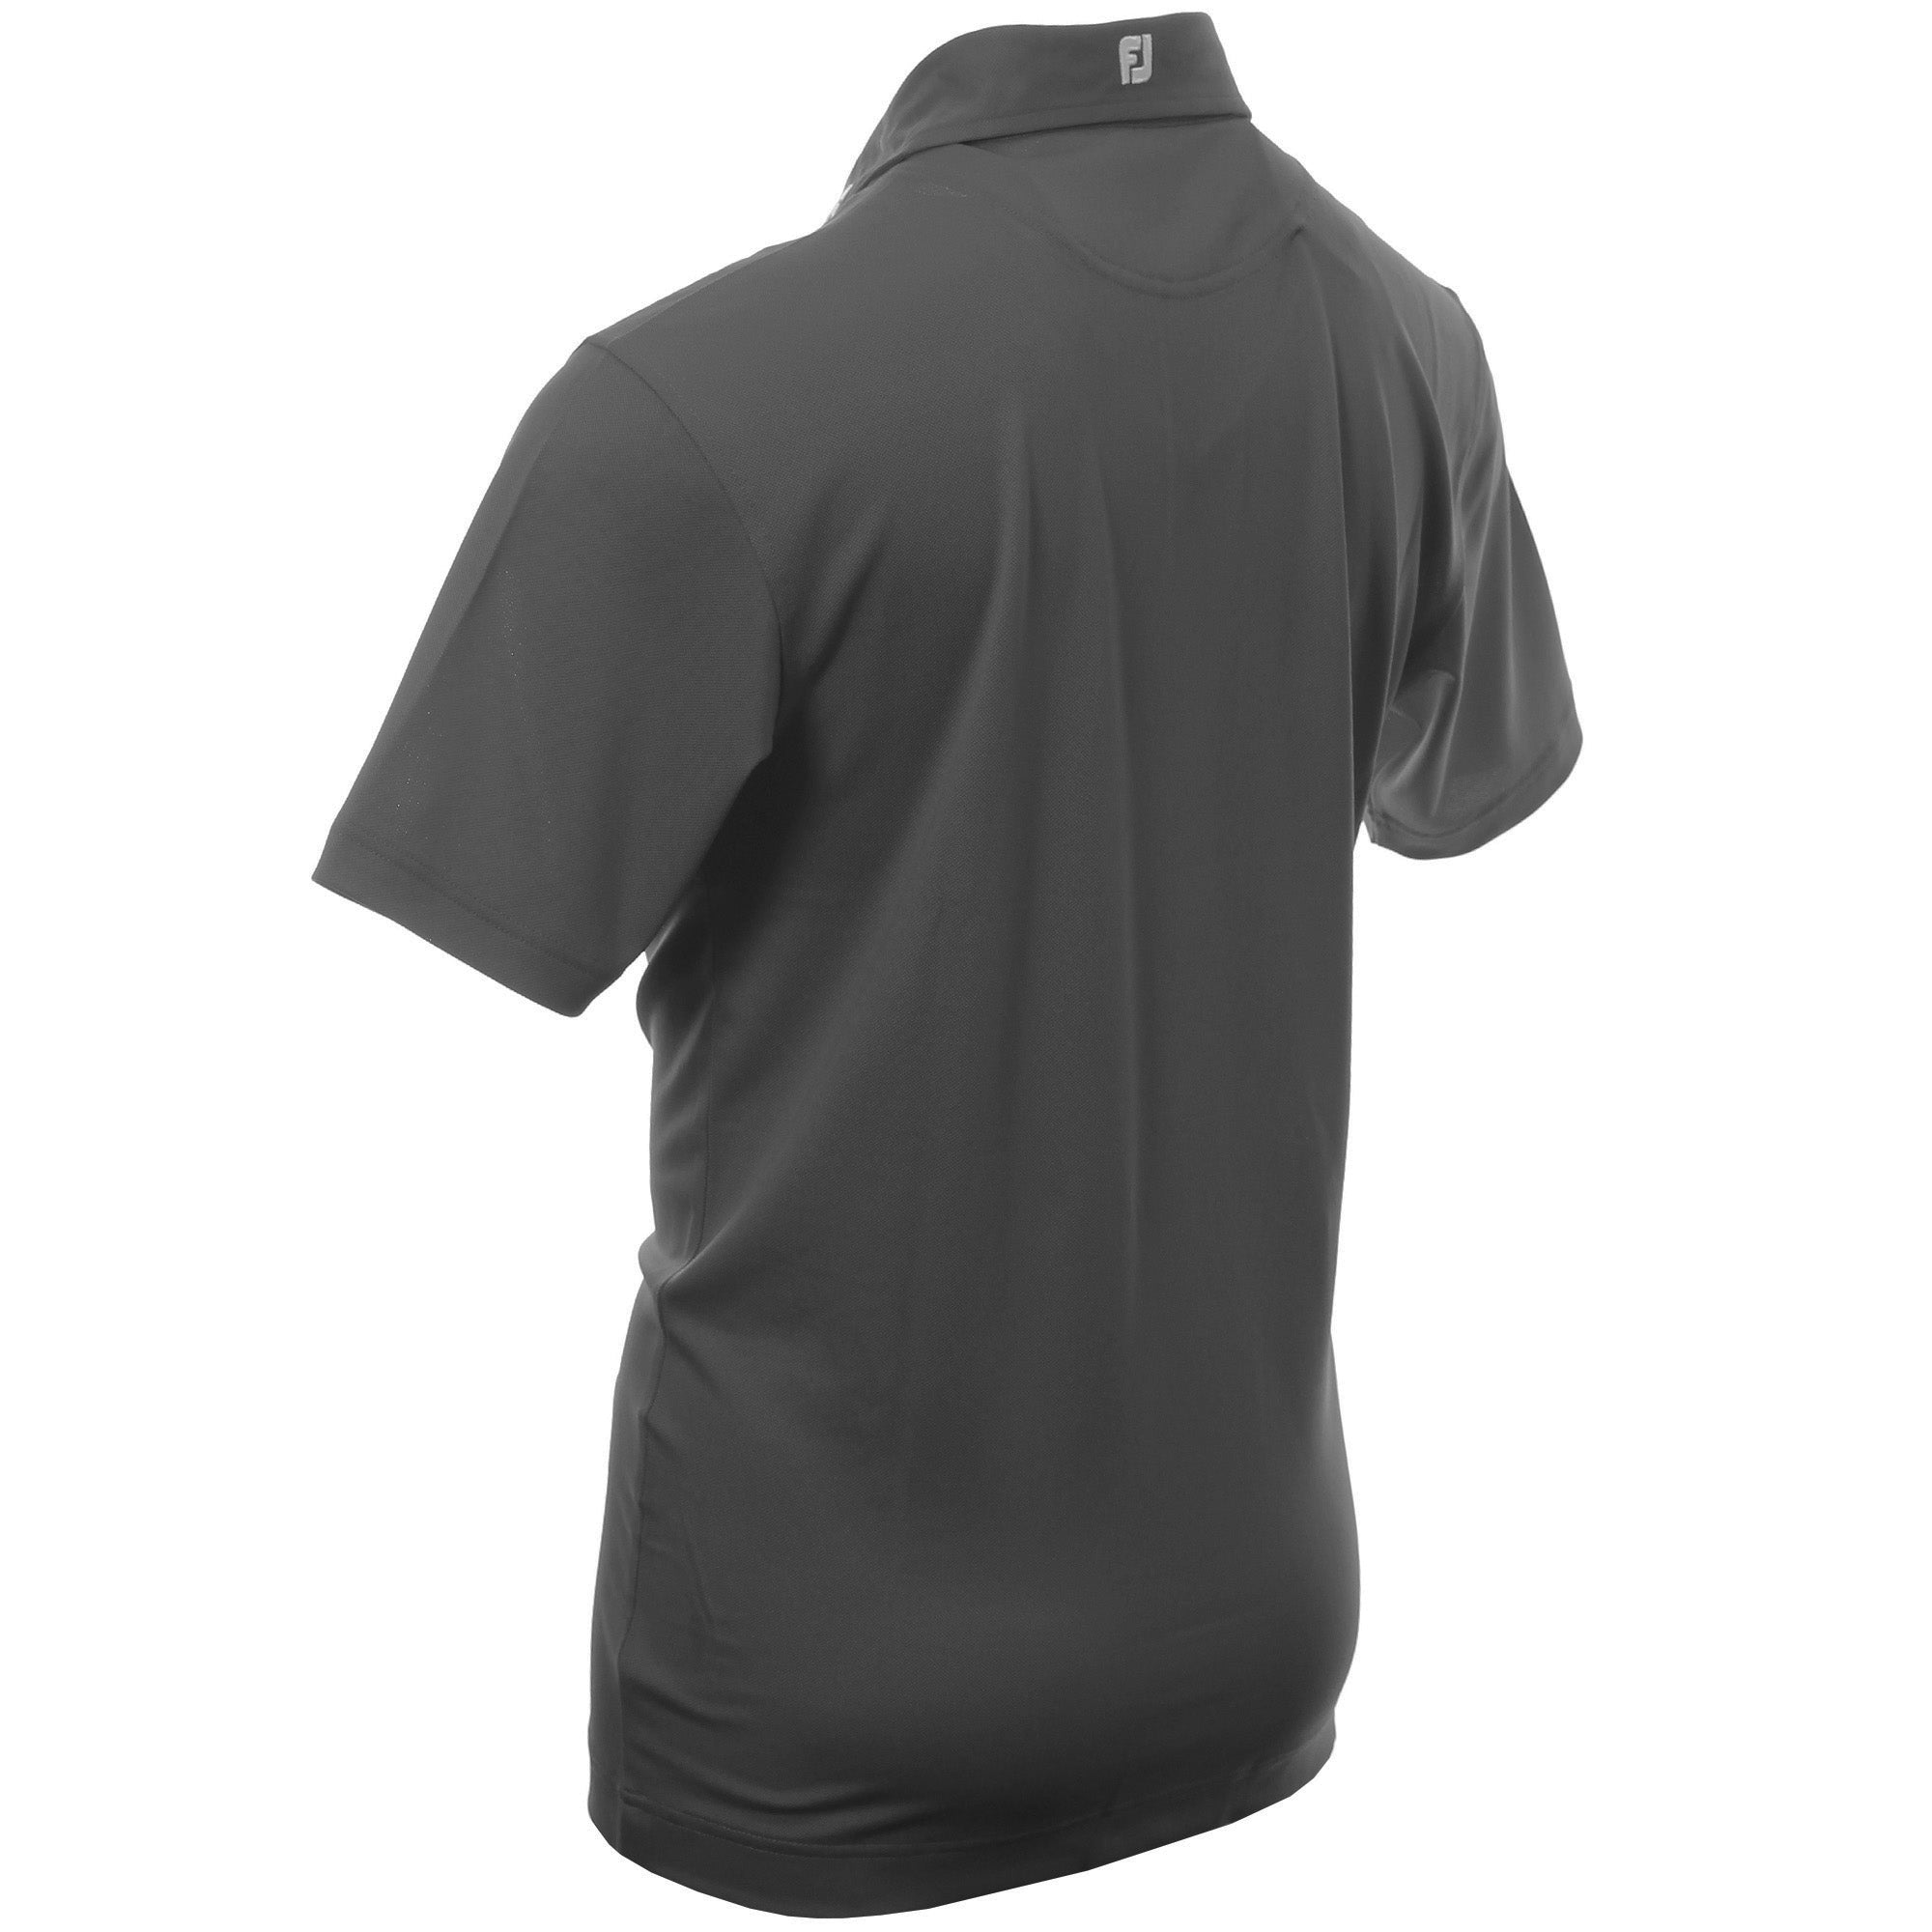 FootJoy Stretch Pique Solid Golf Shirt 92420 Charcoal | Function18